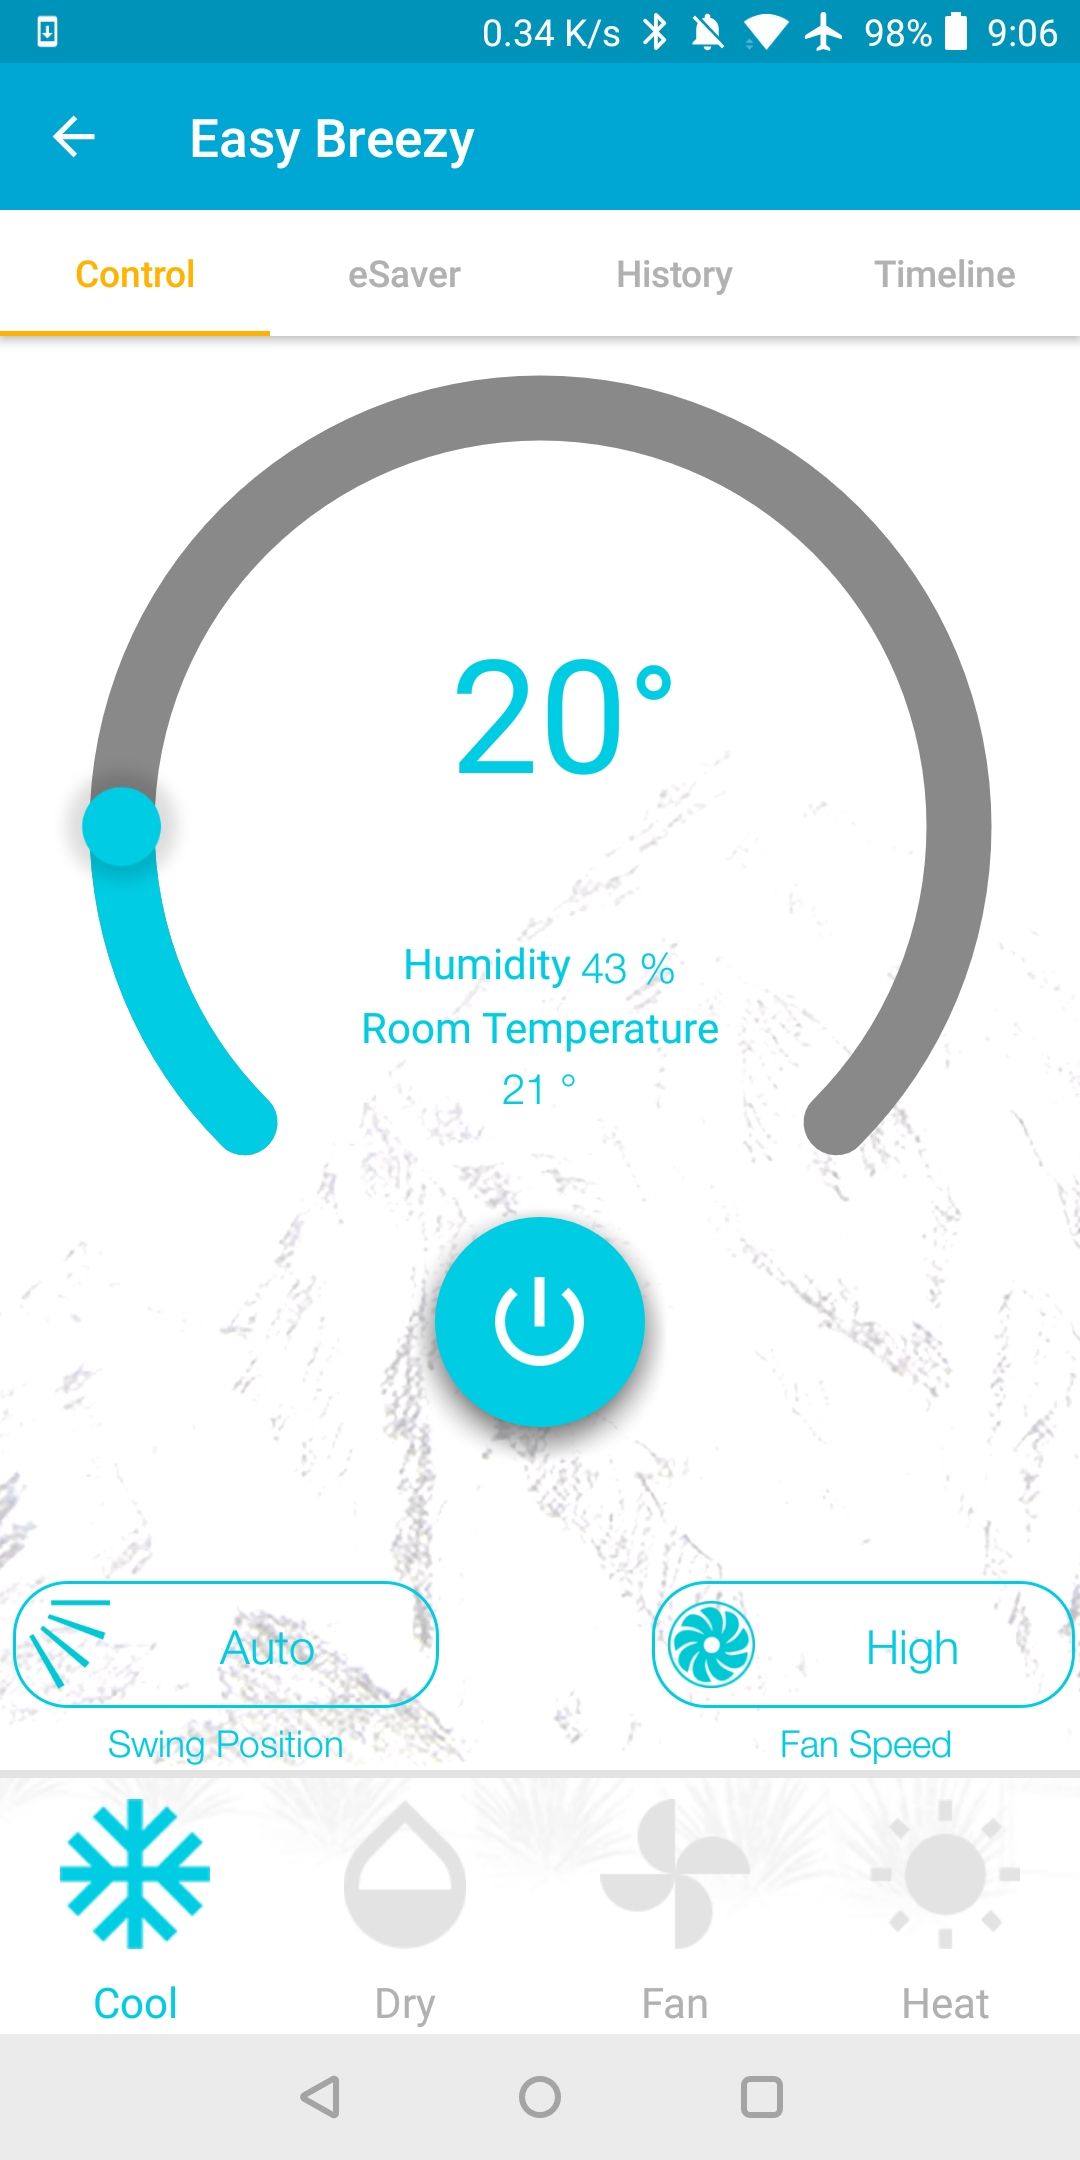 Cielo Breez review: Smartening up your air conditioner, the easy way